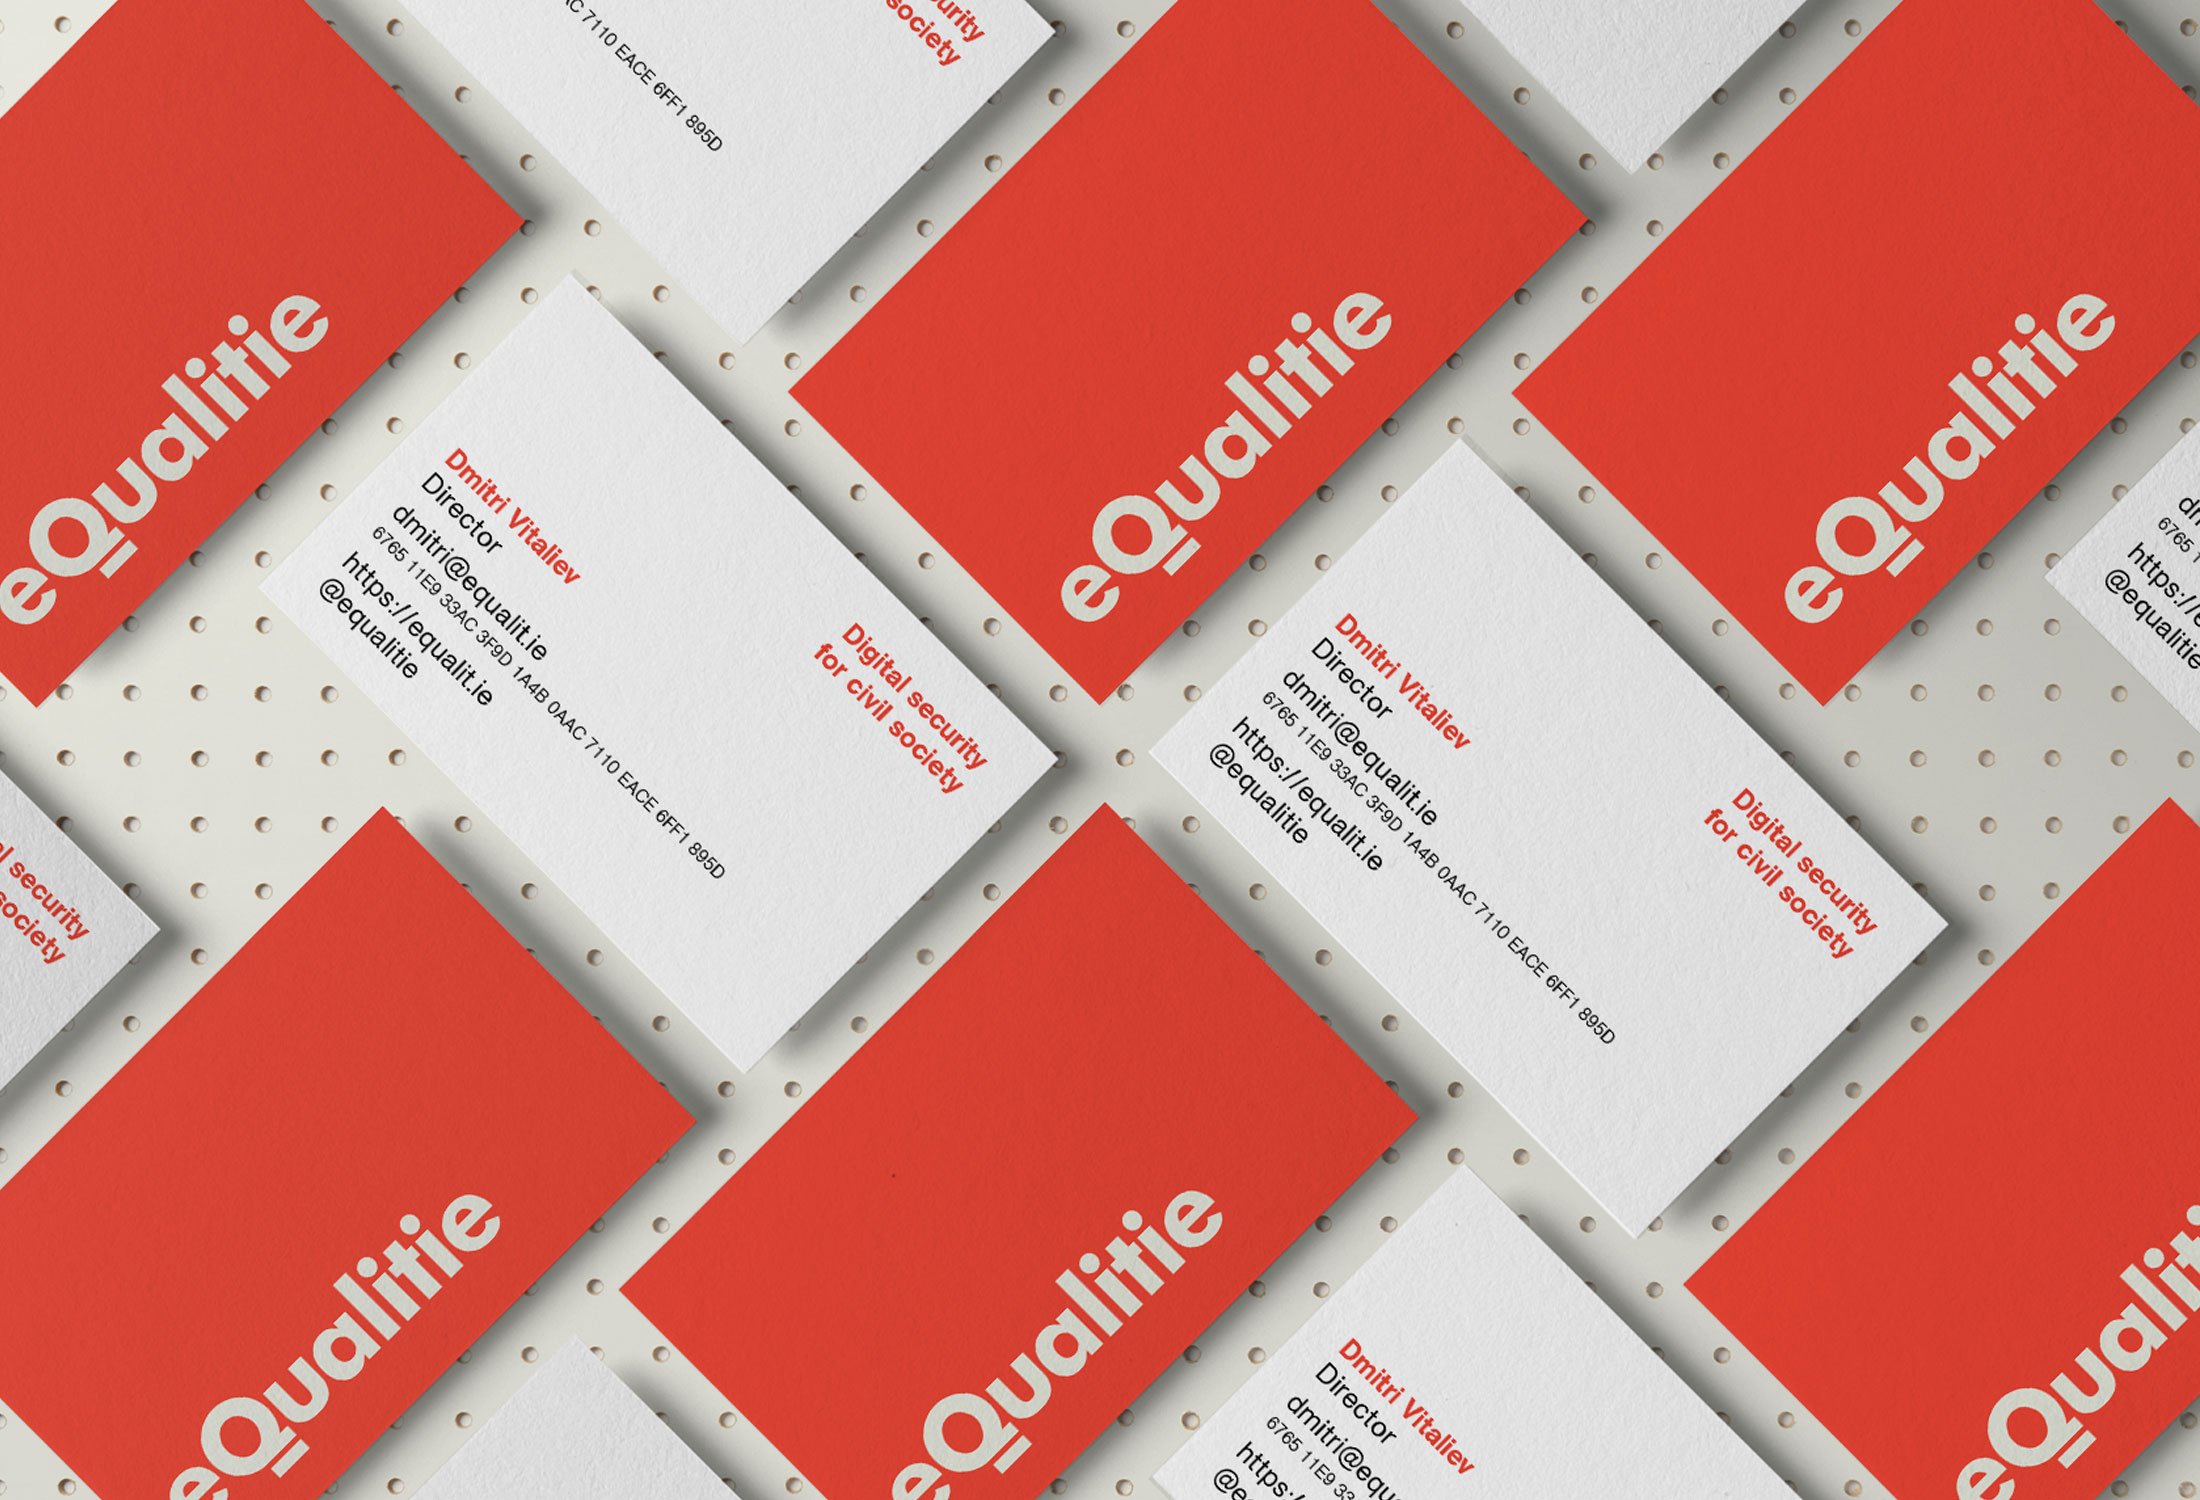 eQualitie stationery